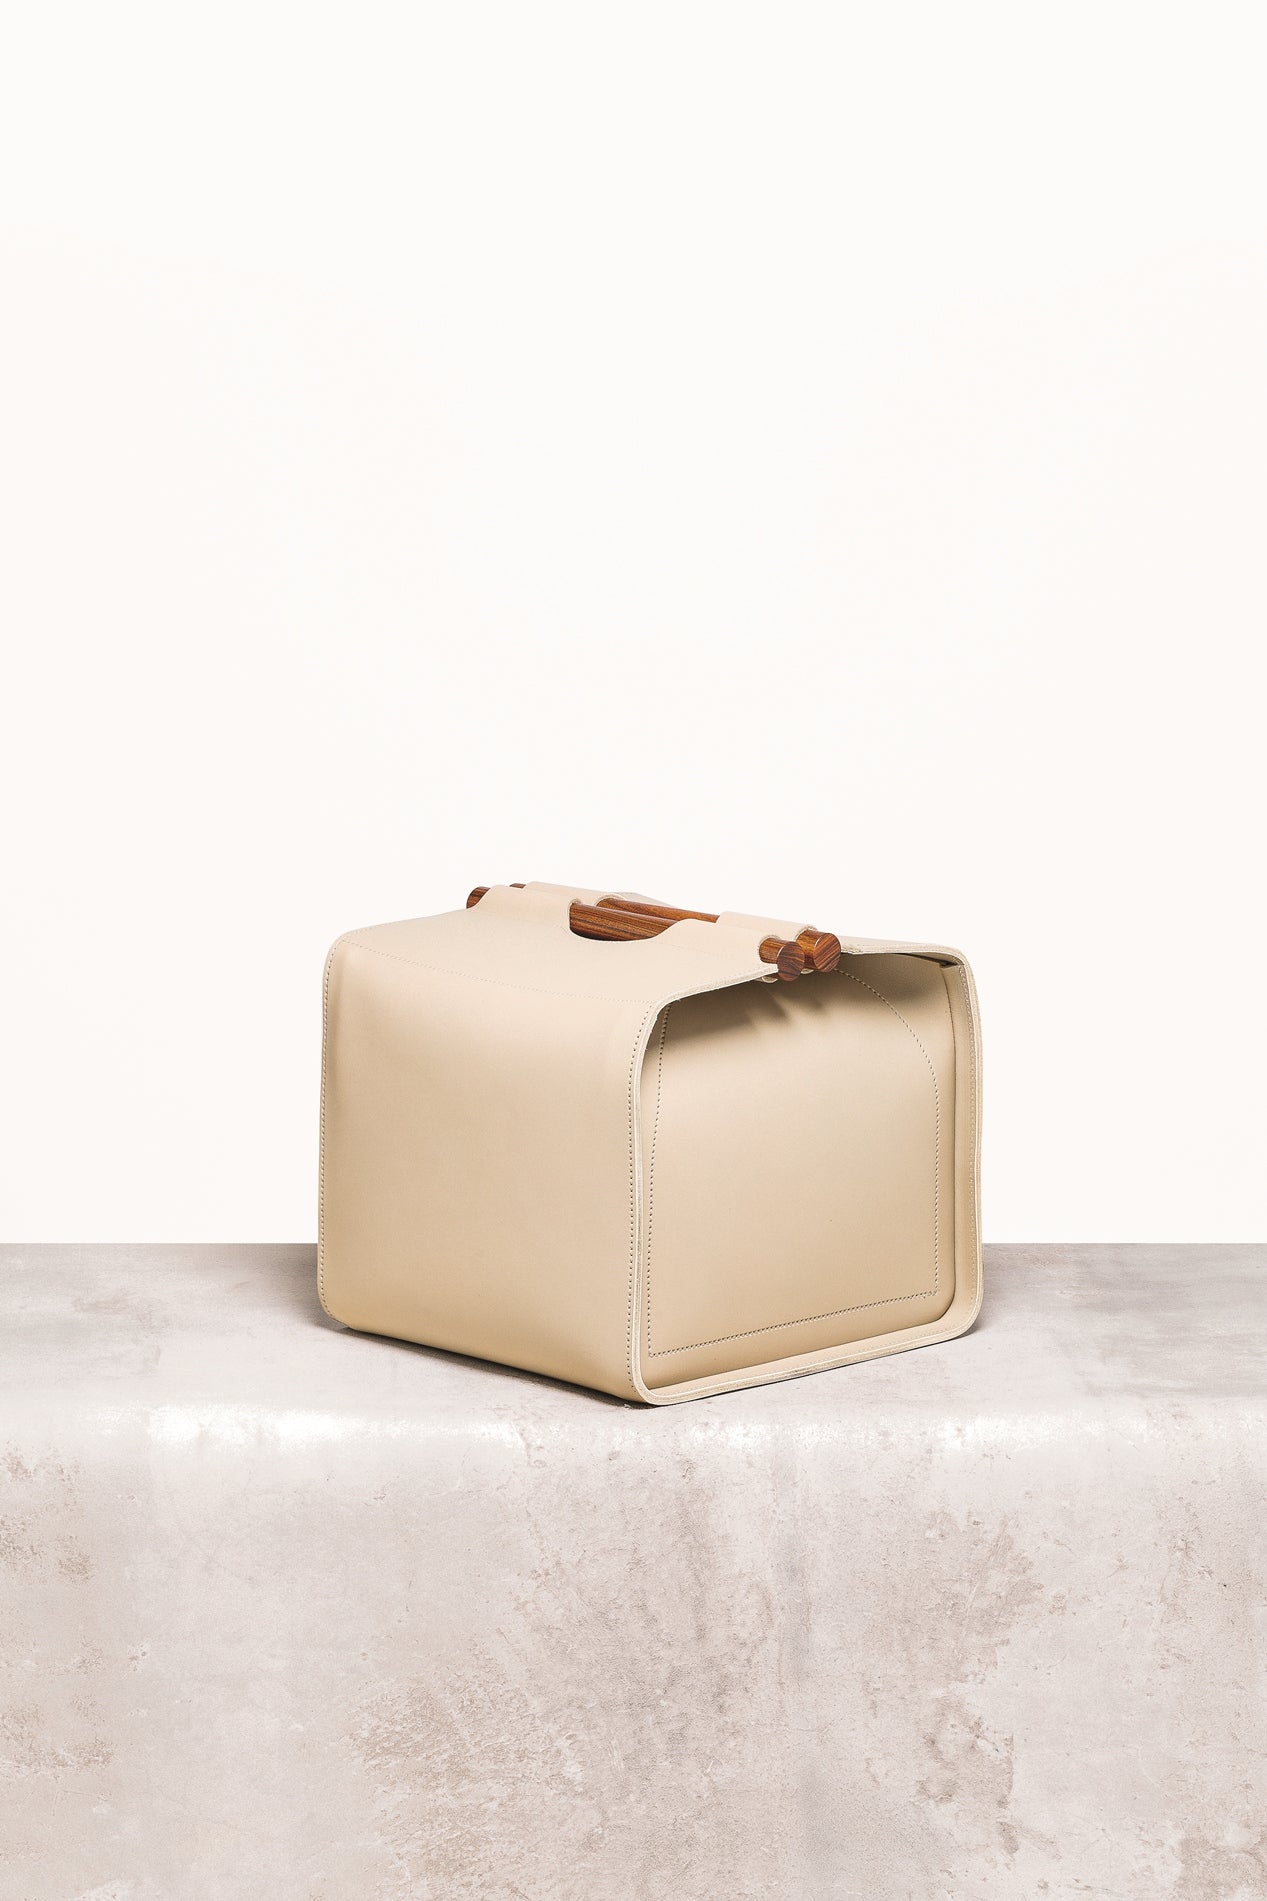 Rabitti 1969 Jota Square Saddle Leather Storage Baskets | Elegant and Functional Storage Solution | Crafted with High-Quality Saddle Leather | Solid Palisander Handles for a Touch of Luxury | Explore a Range of Luxury Home Accessories at 2Jour Concierge, #1 luxury high-end gift & lifestyle shop